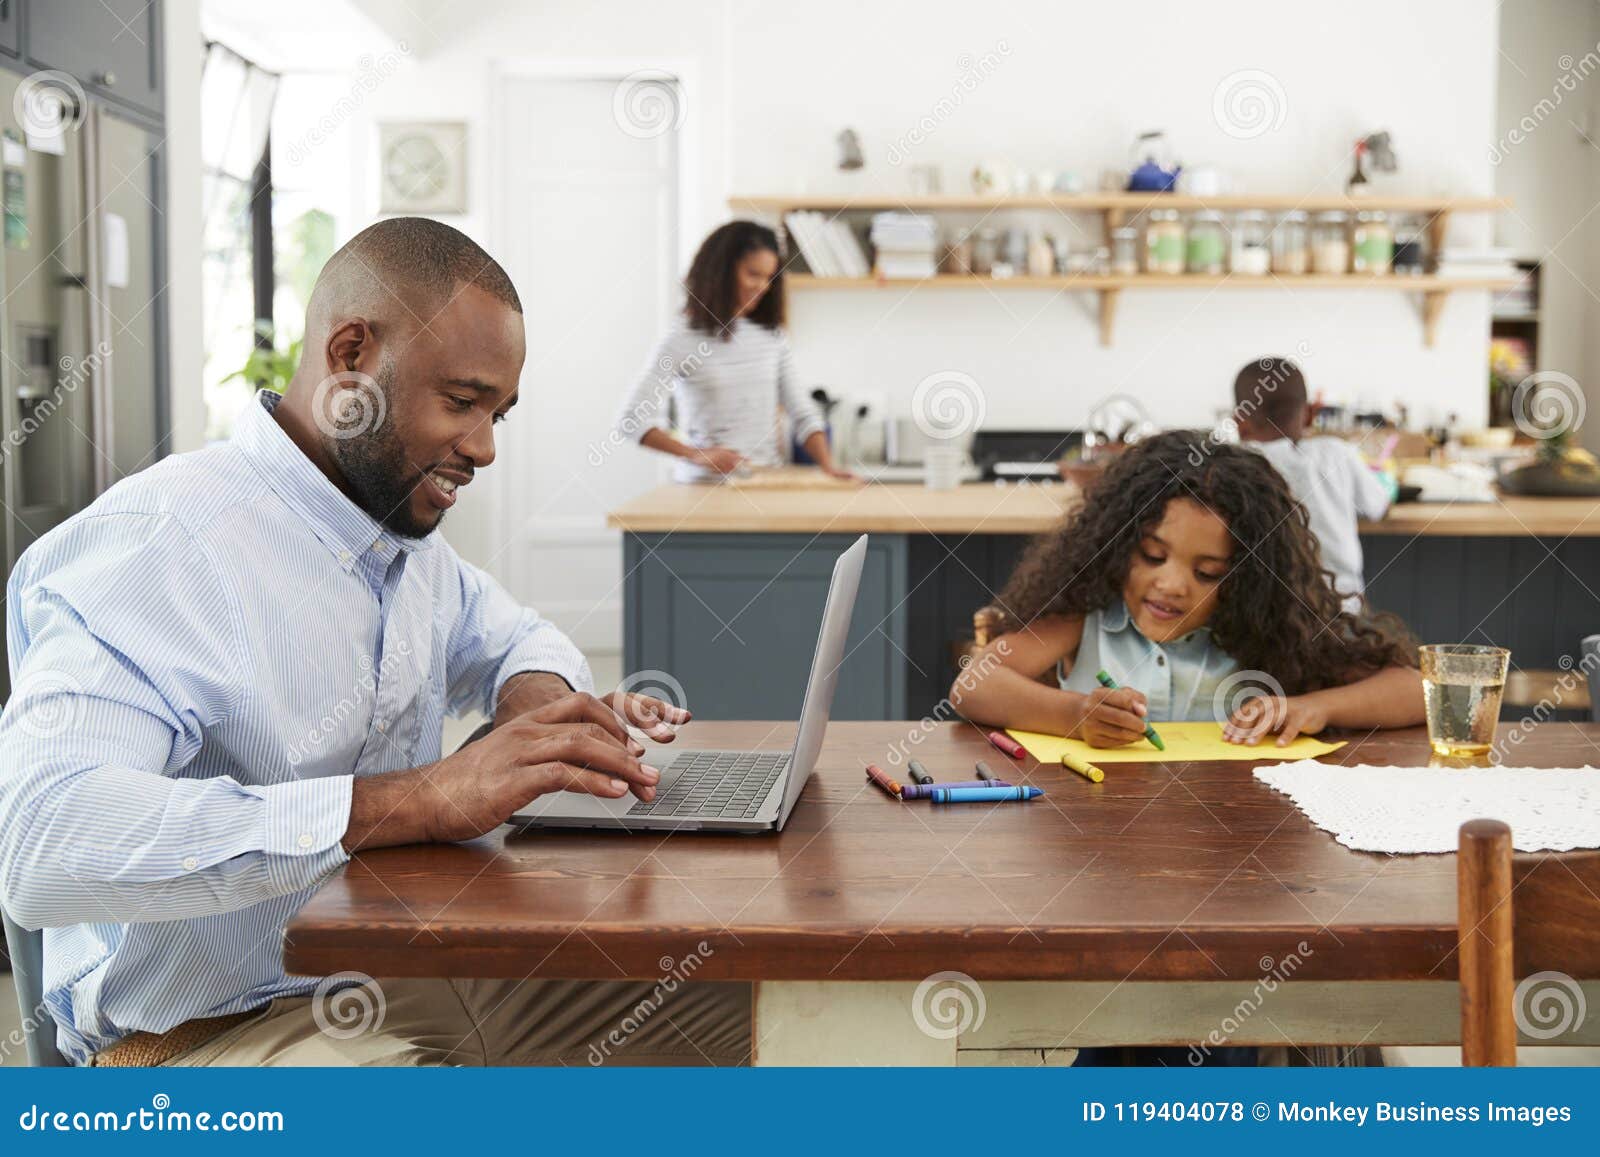 young black family busy working in their kitchen